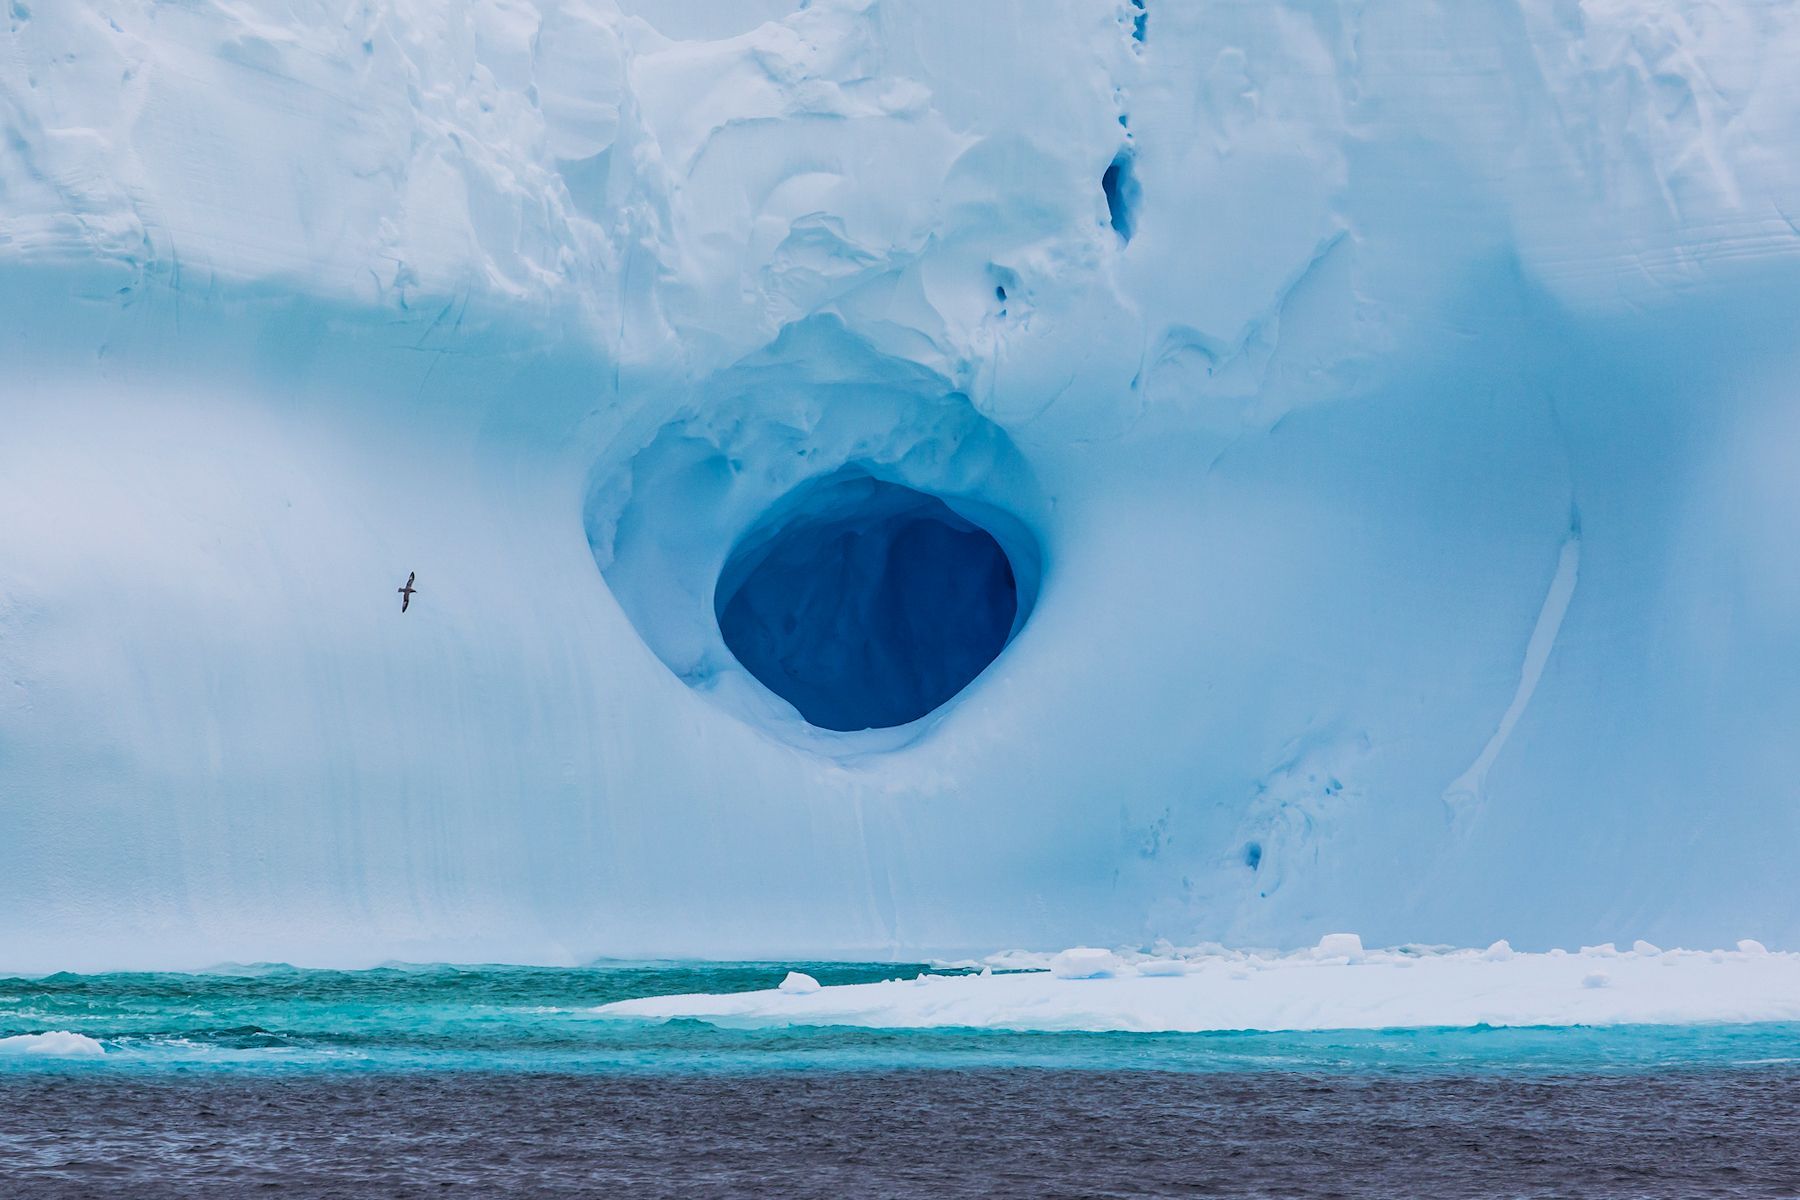 A Southern Fulmar flies past a hole in a gigantic iceberg in Antarctica